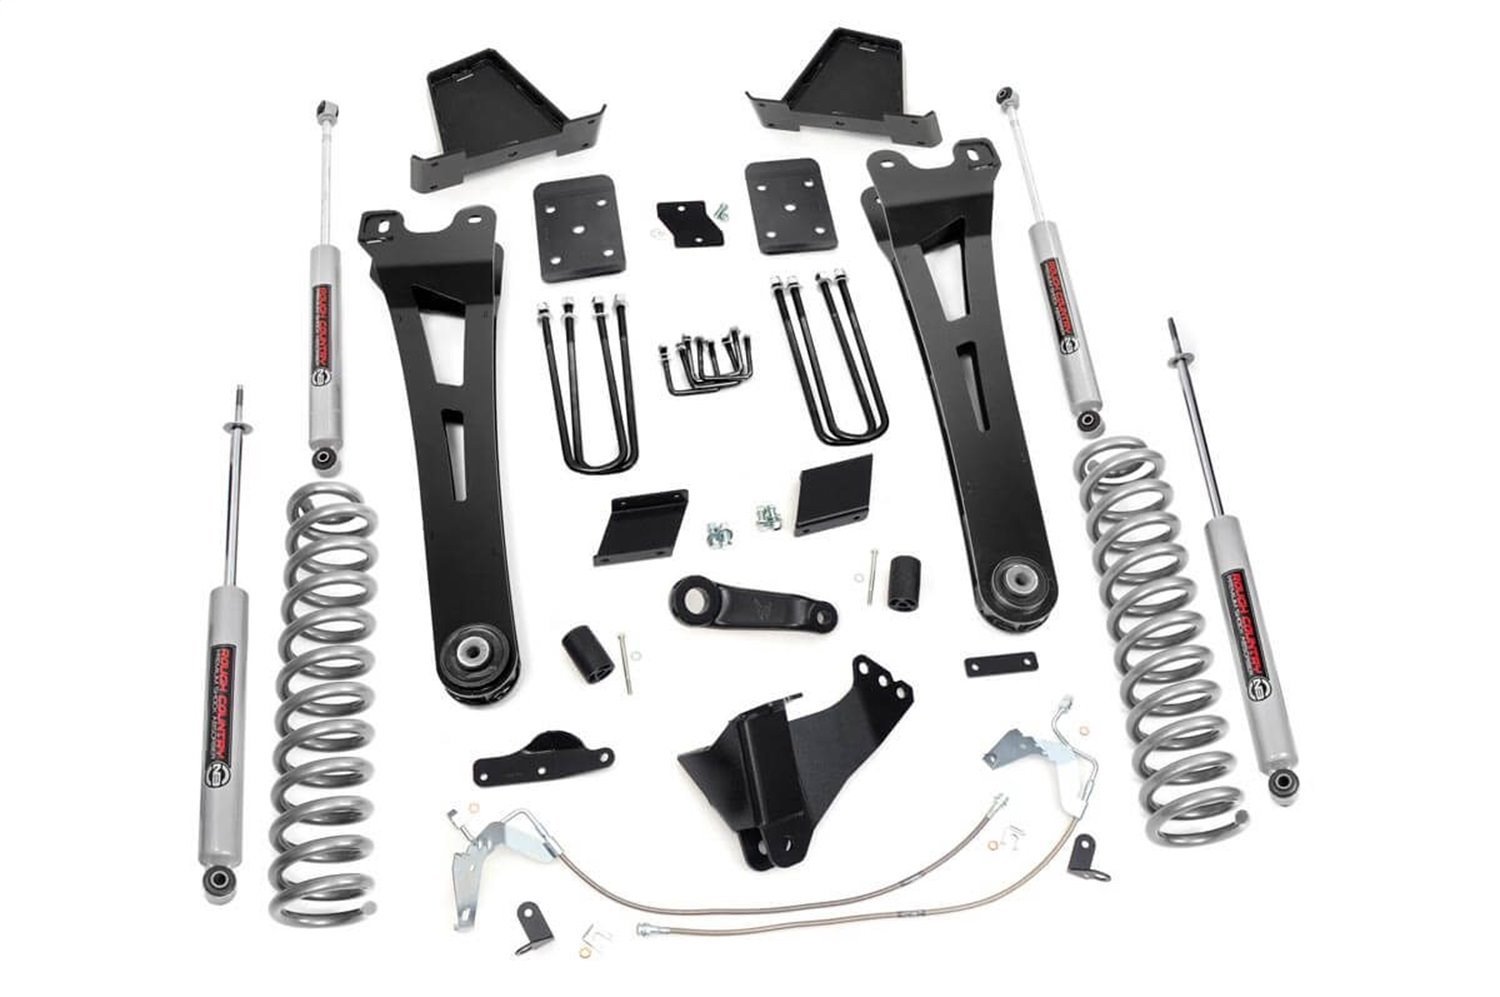 543.20 6 in. Lift Kit, Diesel, Radius Arm, No OVLD, Ford Super Duty (15-16)